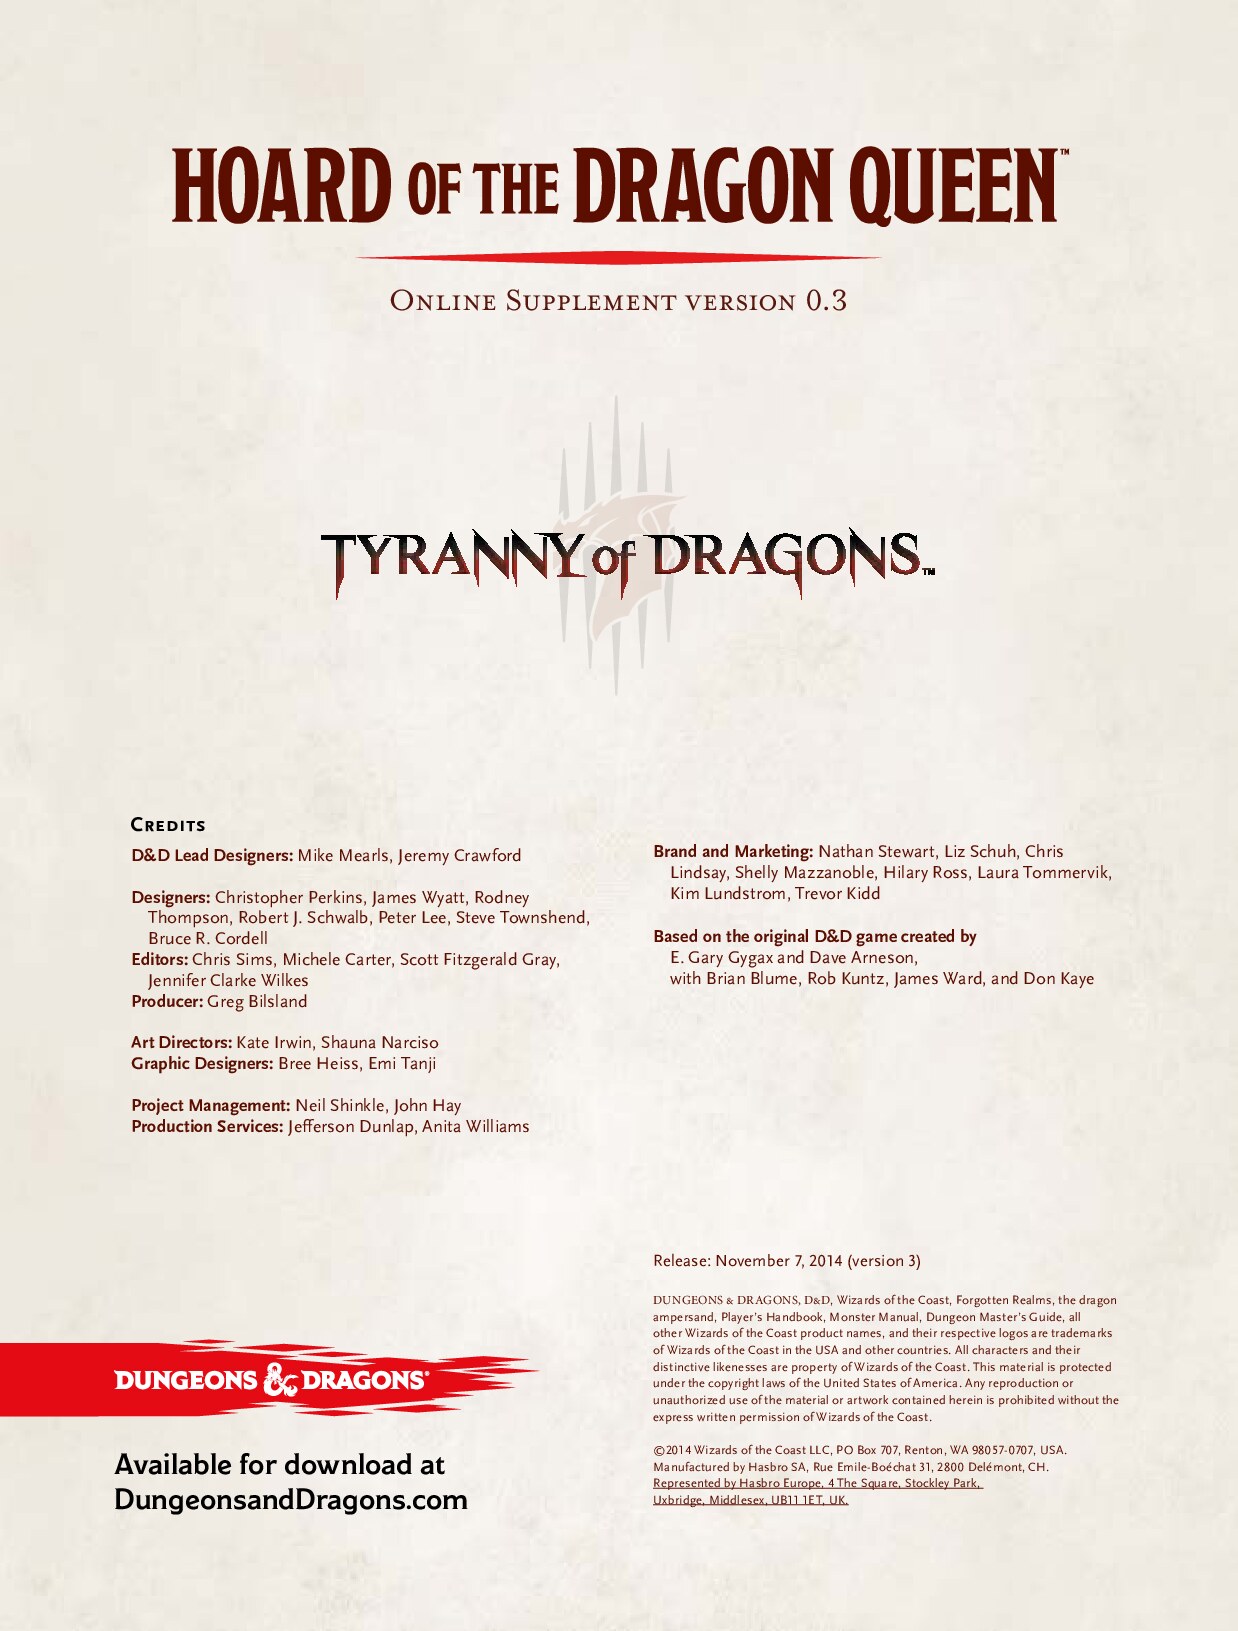 Hoard of the Dragon Queen - Supplement v0.3